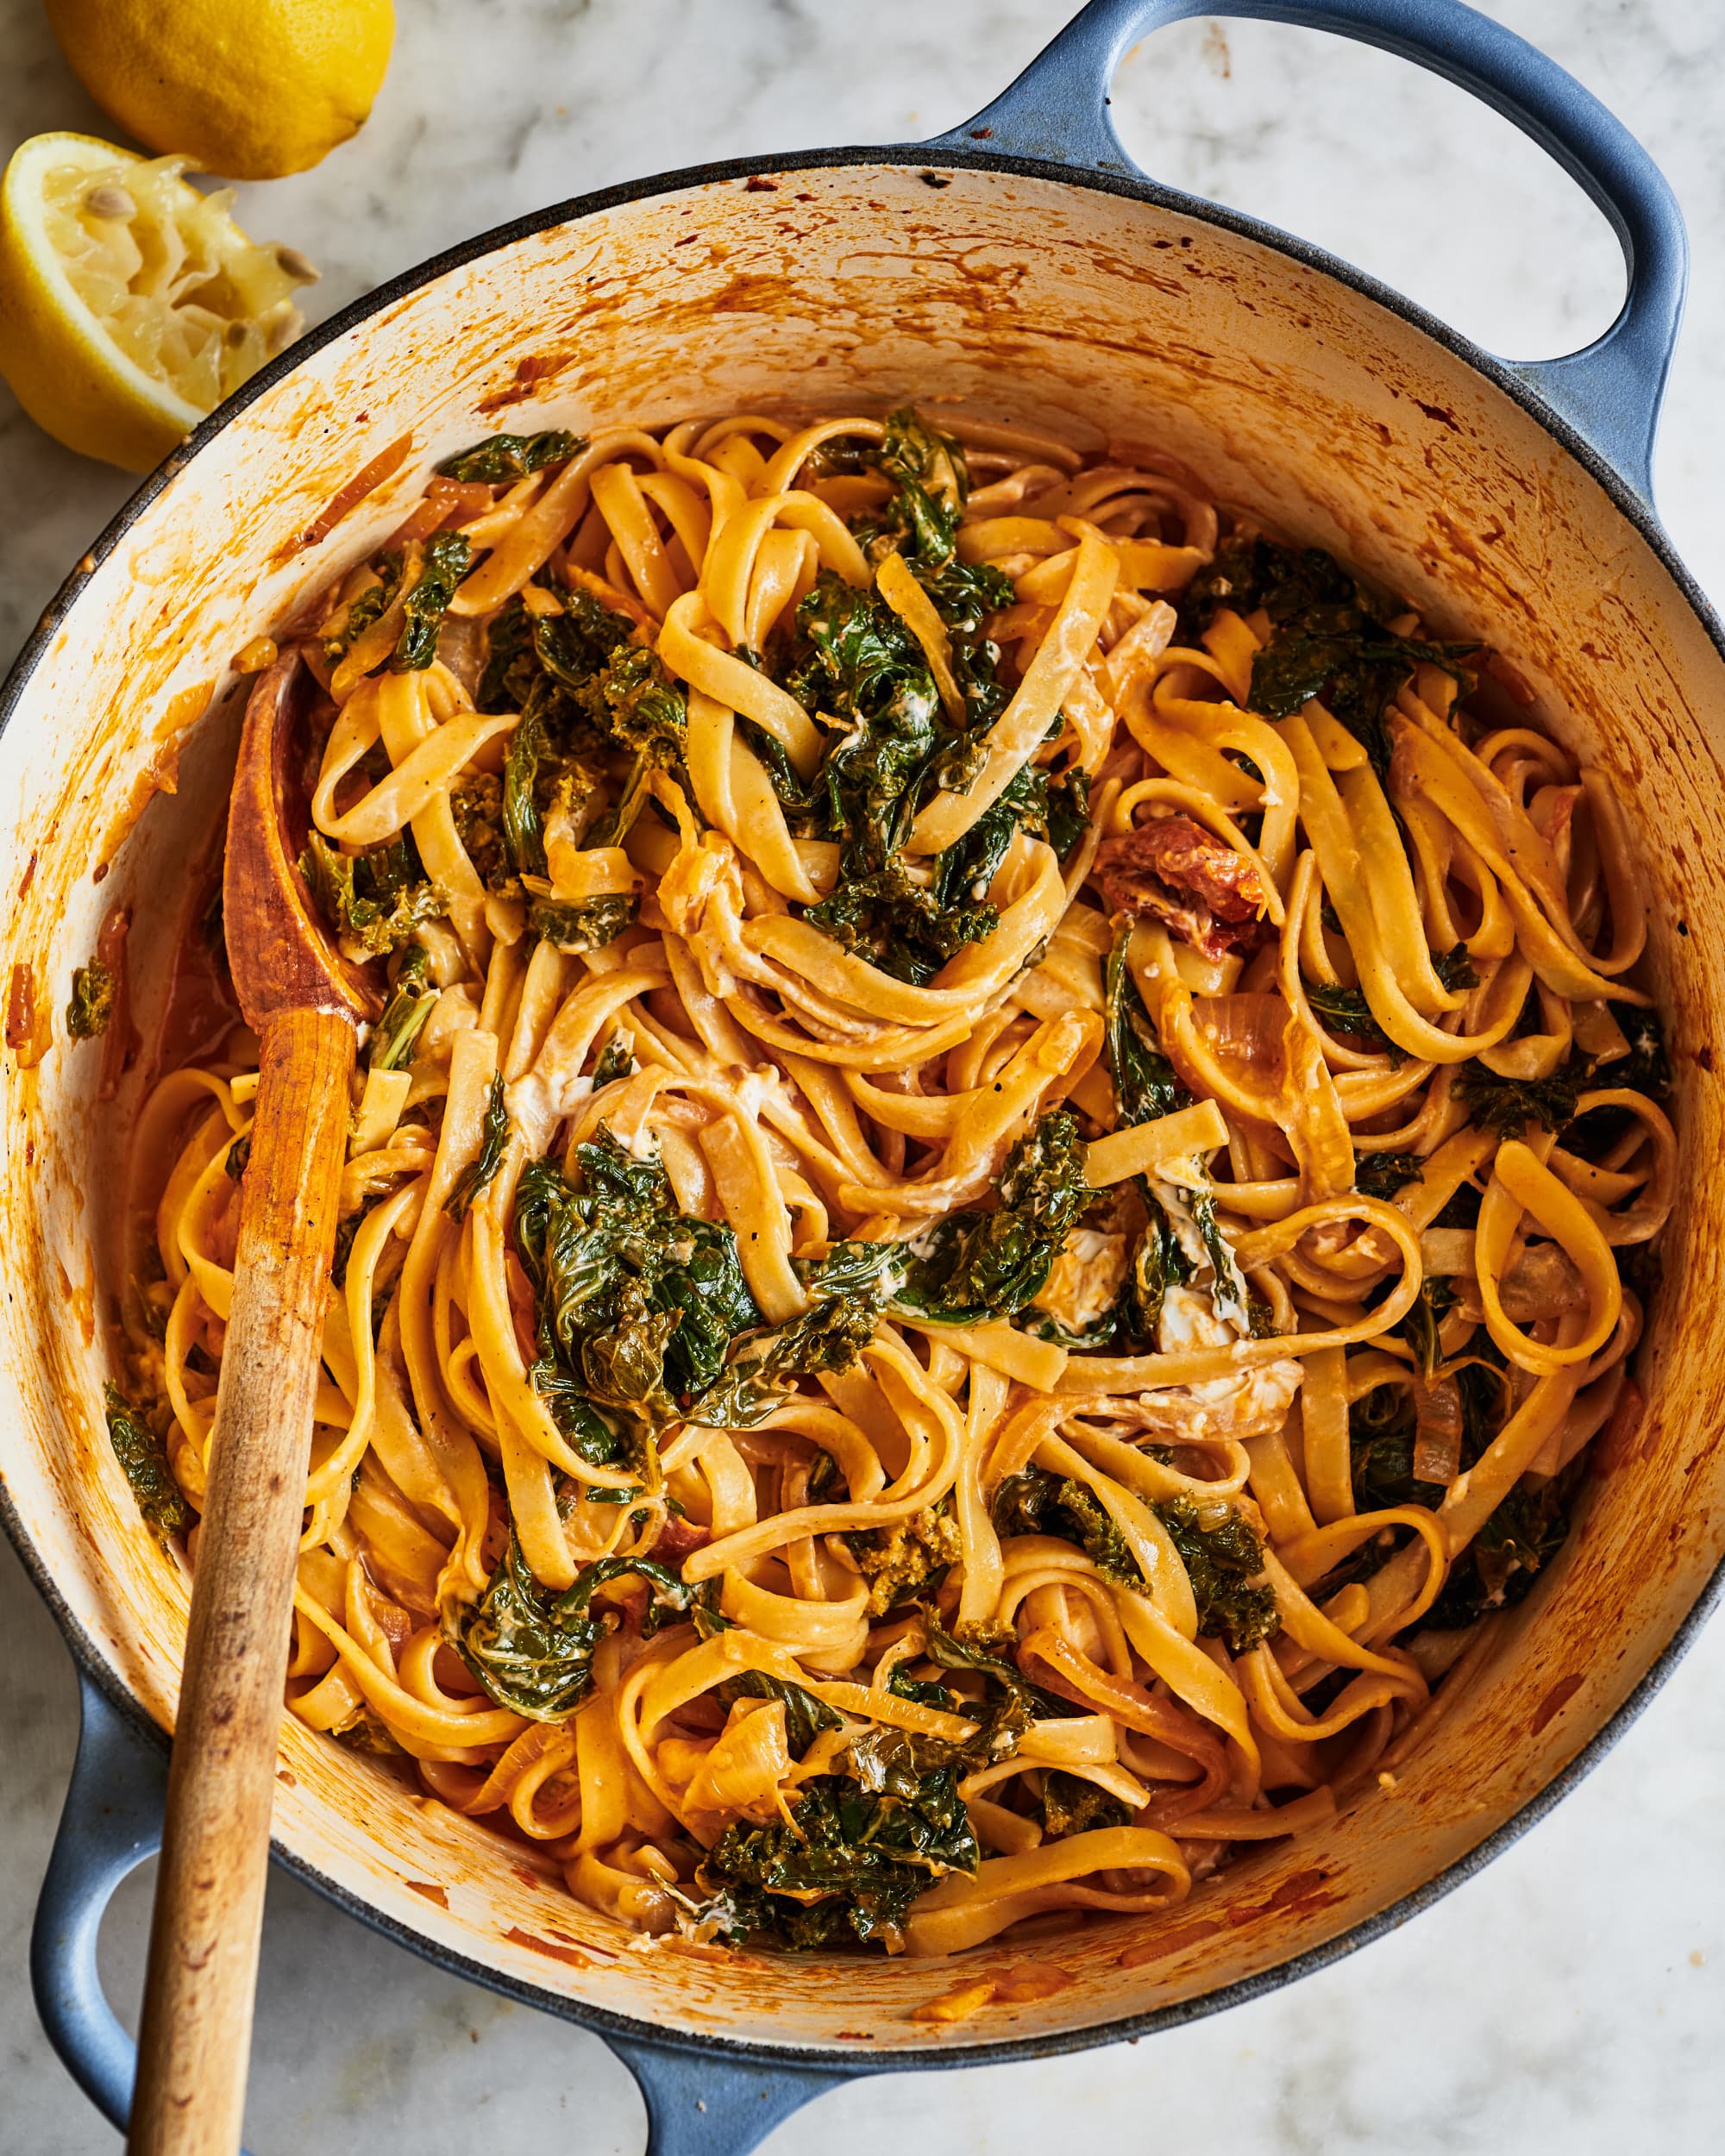 https://cdn.apartmenttherapy.info/image/upload/v1641842274/k/Photo/Recipes/2022-01_Pasta-with-Braised-Greens/2022-01-05_ATK-0370.jpg